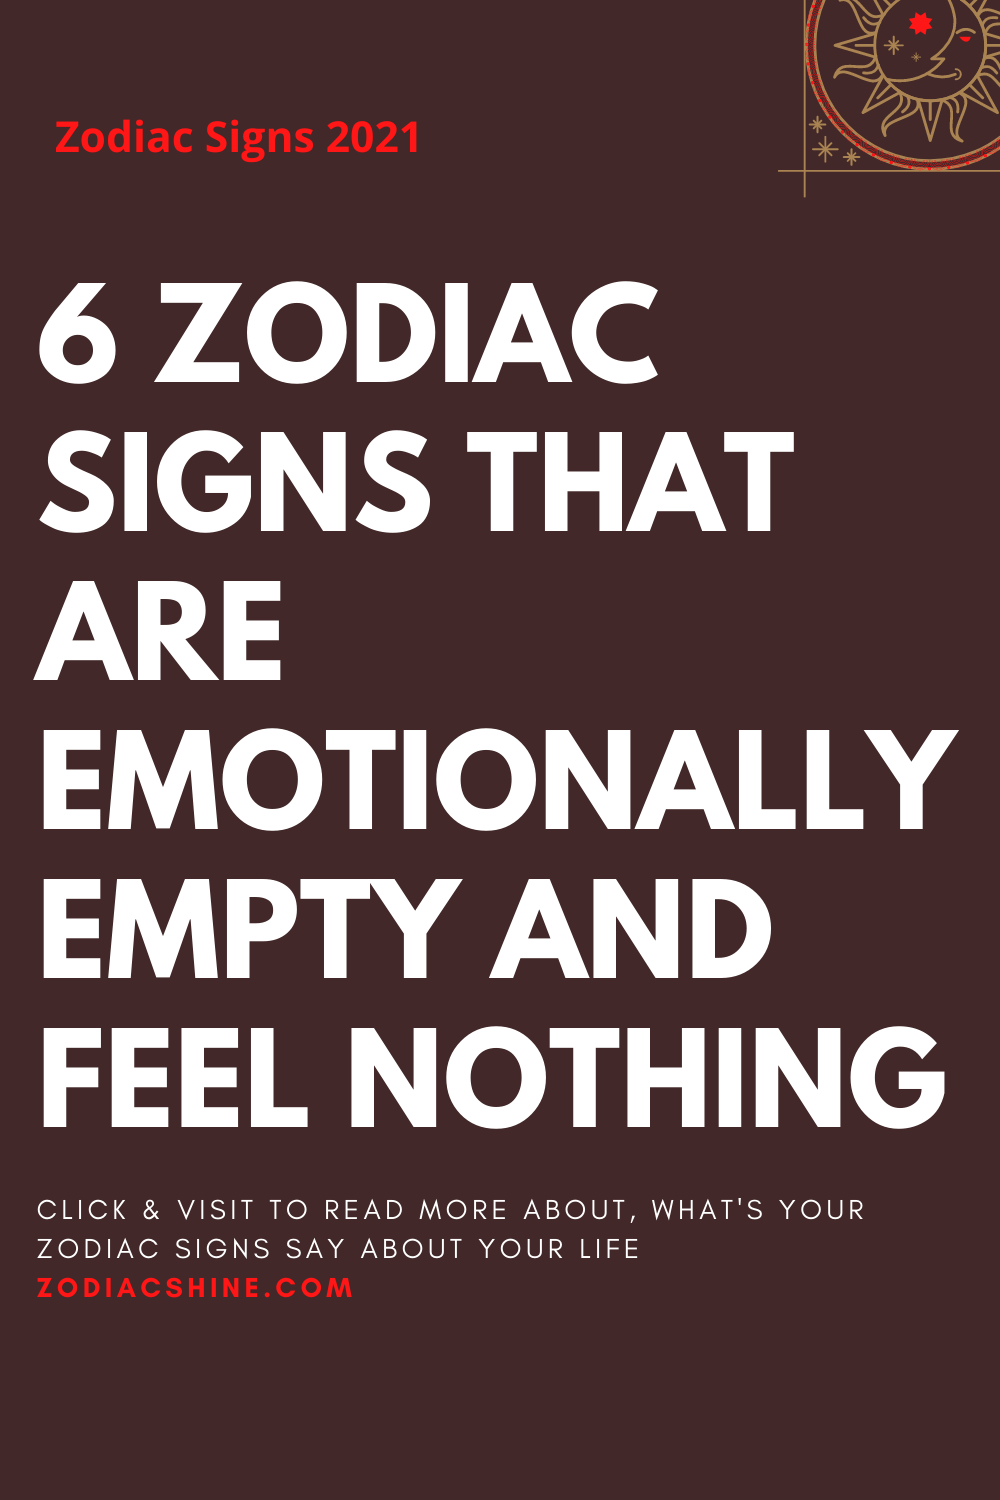 6 ZODIAC SIGNS THAT ARE EMOTIONALLY EMPTY AND FEEL NOTHING